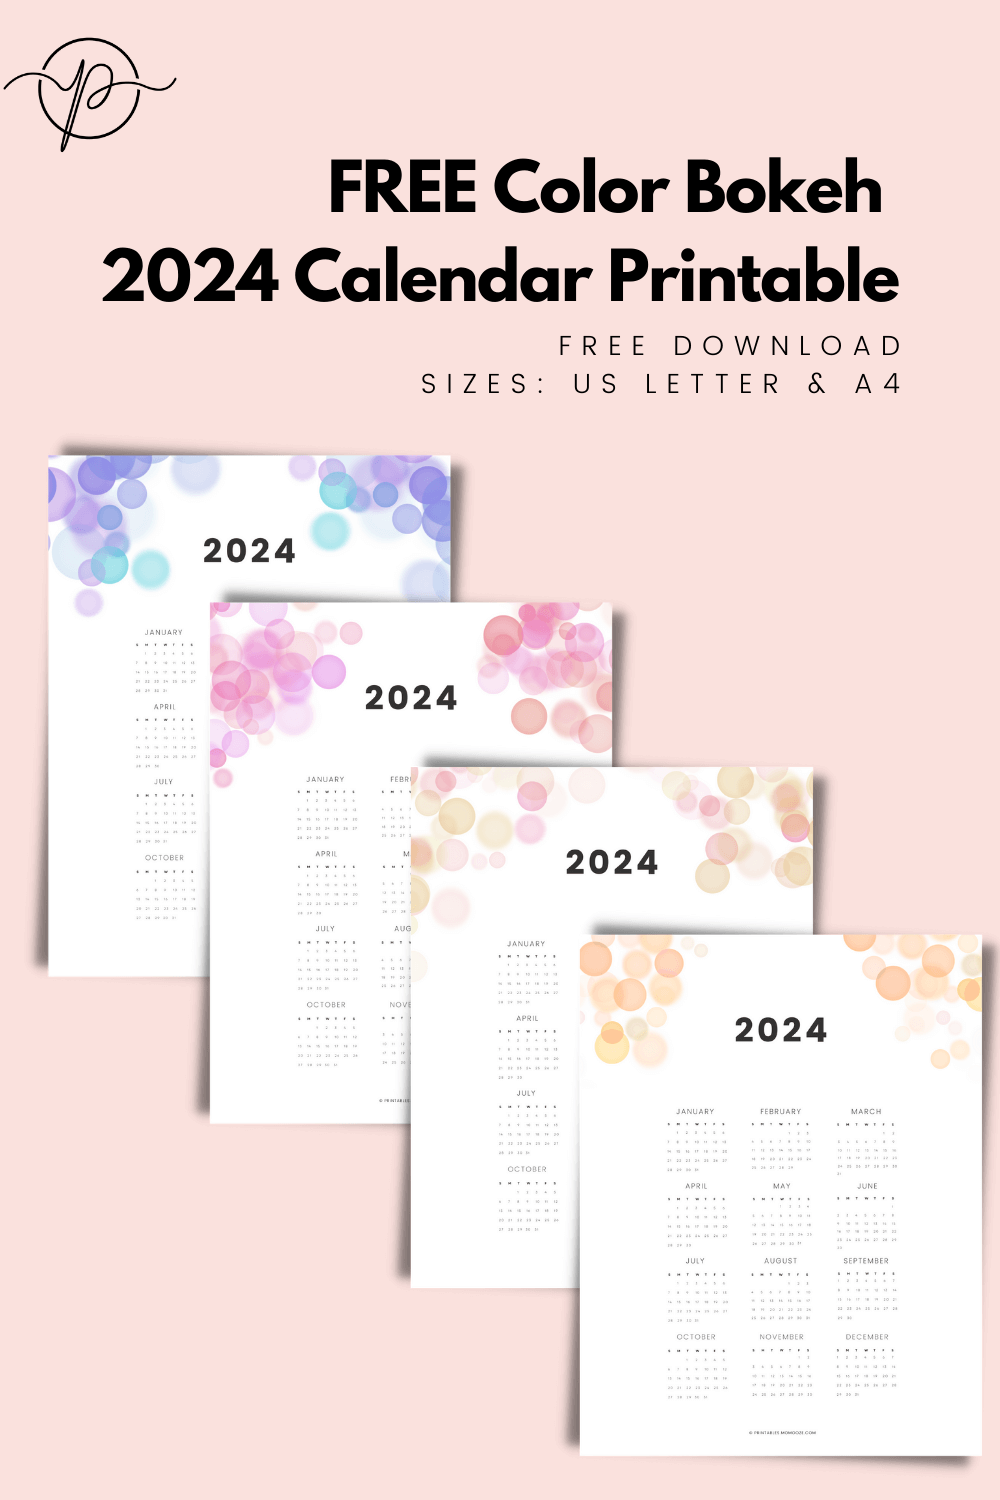 2024 Calendar Printable Free Annual Yearly Year At Glance3 